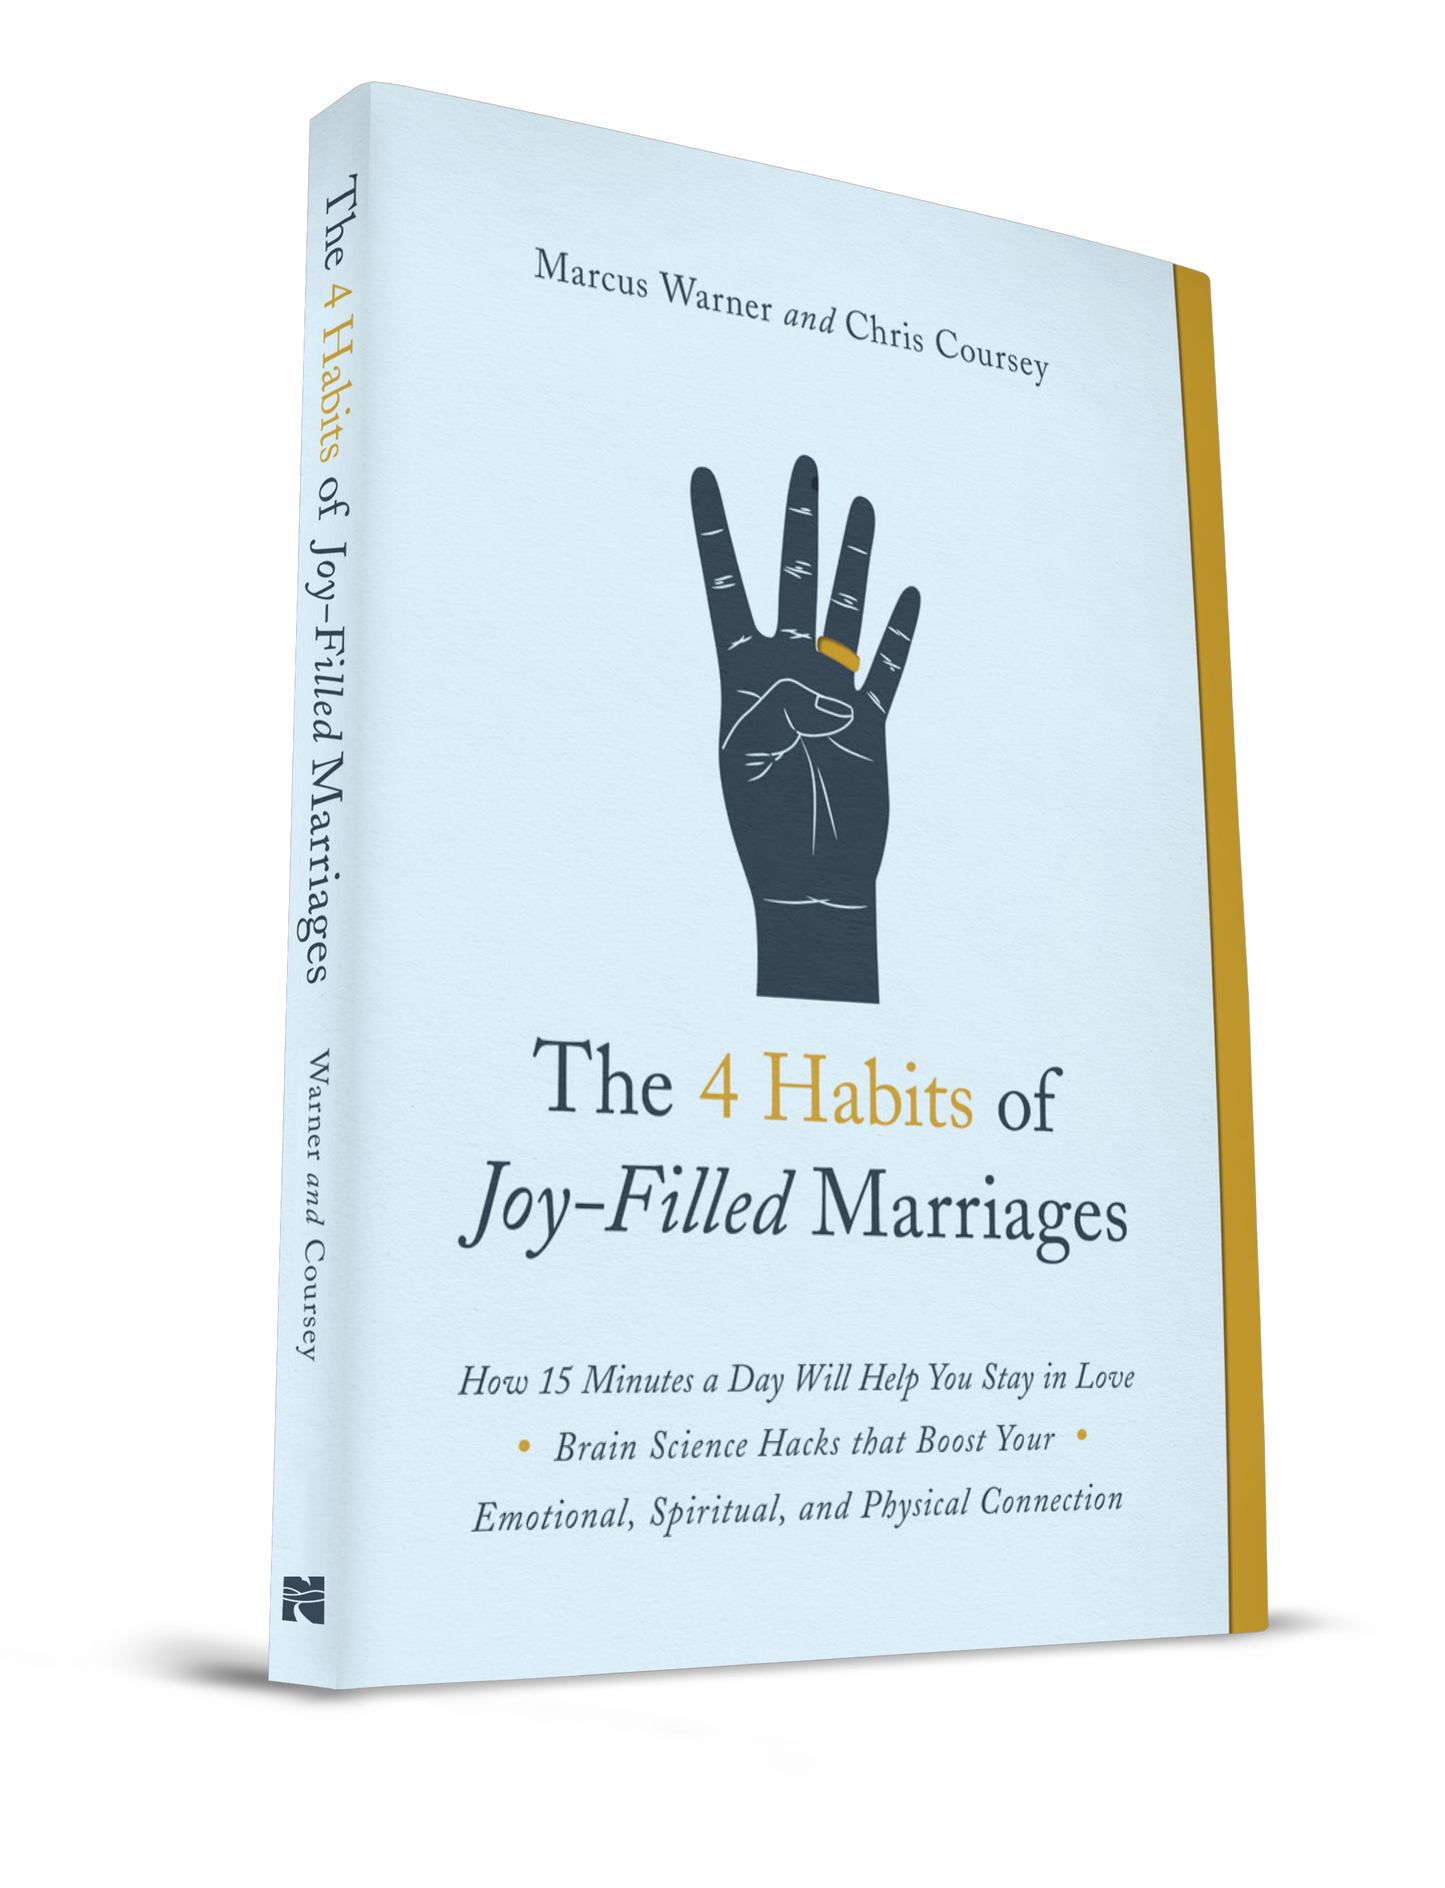 The 4 Habits of Joy-Filled Marriages